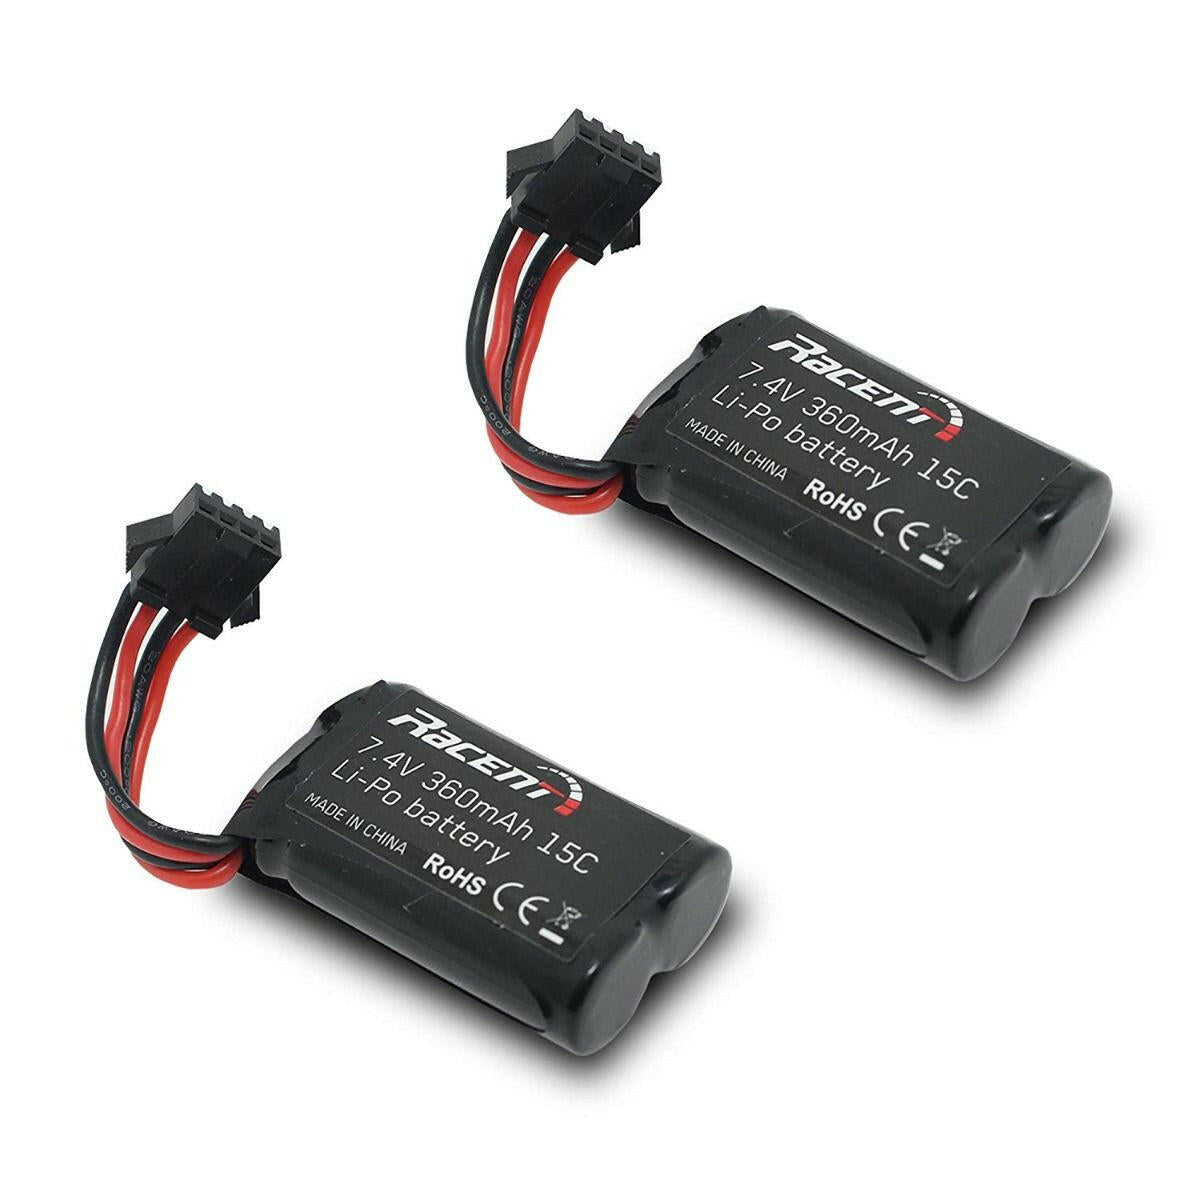 VOLANTEXRC RC Boat Spare Parts: 7.4V-380mAh-LiIon Battery for RC Boat